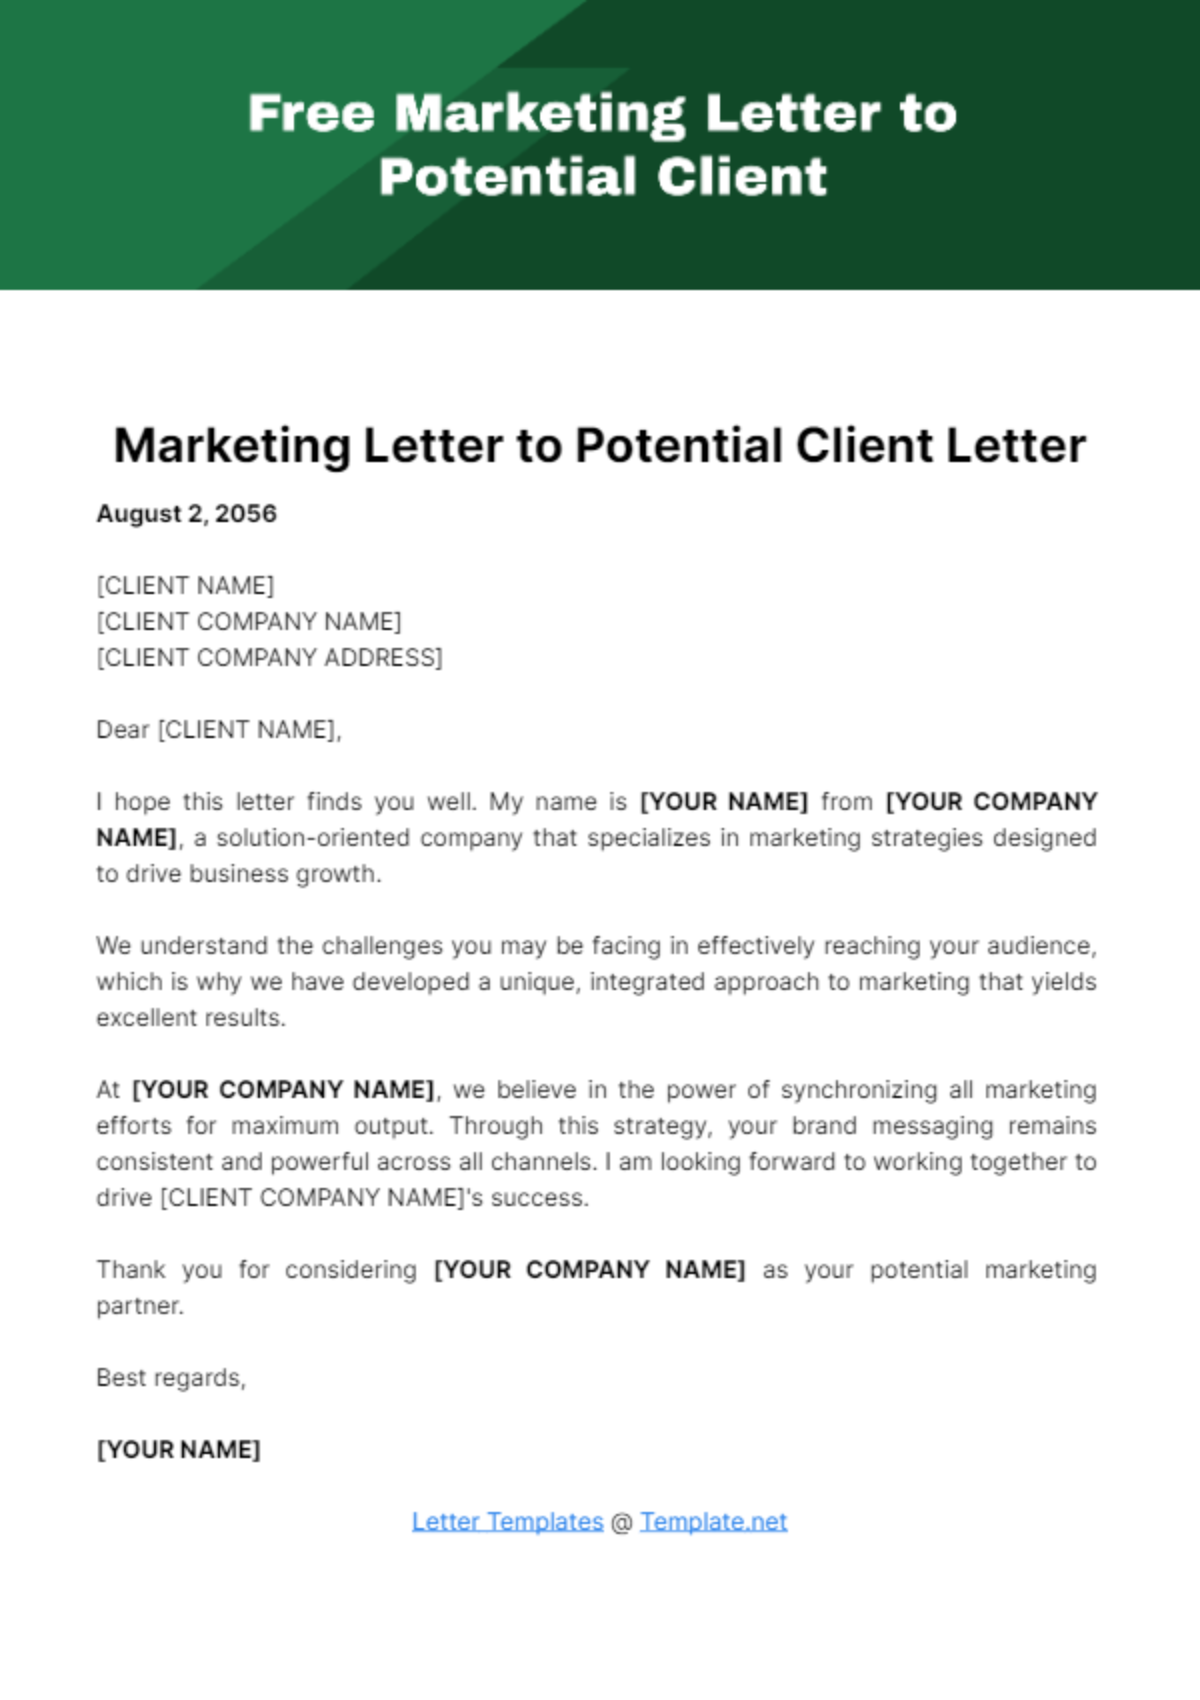 Free Marketing Letter to Potential Client Template